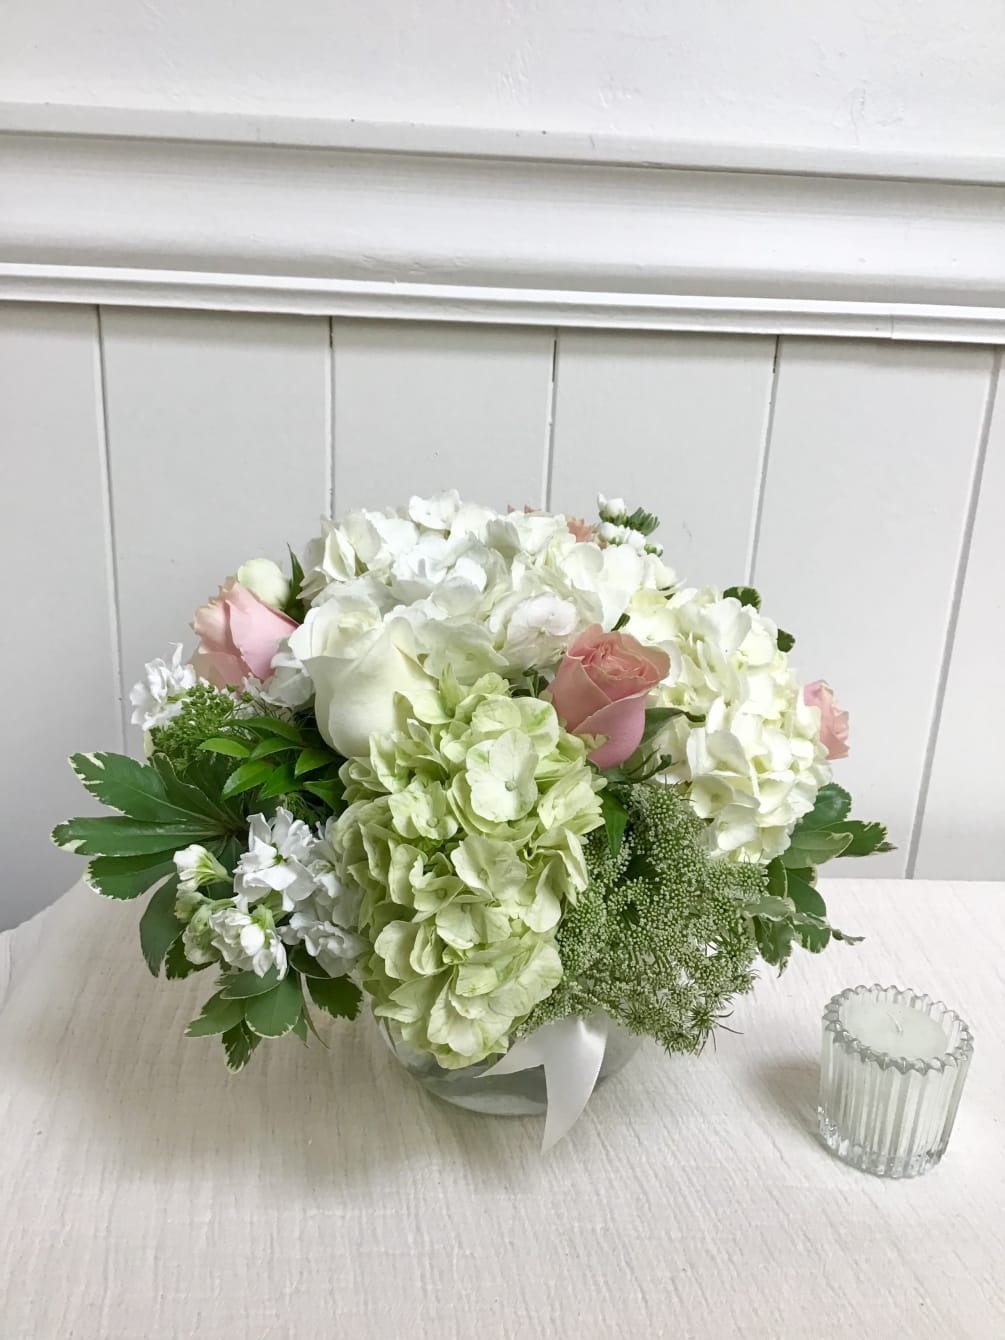 How pretty: Premium hydrangea, chartreuse mini-hydrangea and soft pink and white roses